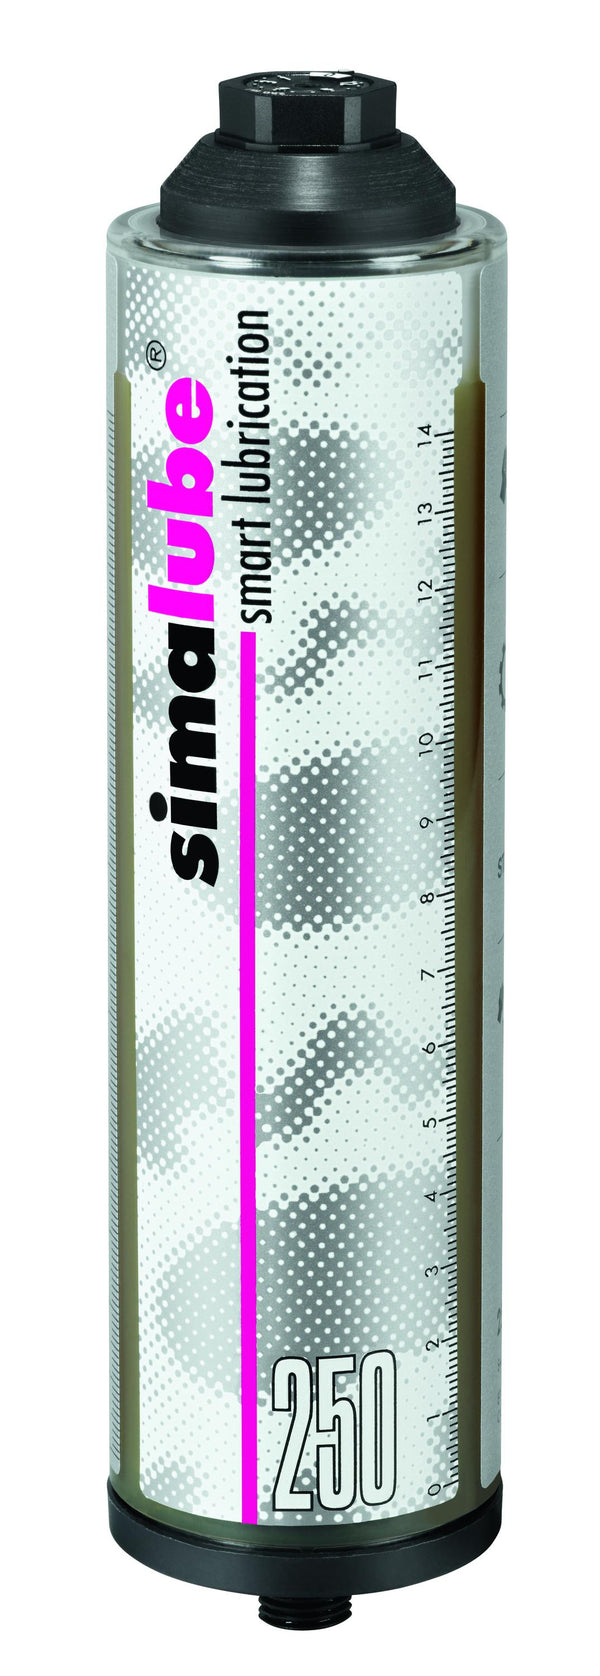 Simalube lubrication cartridge filled with high temperature grease 250ml